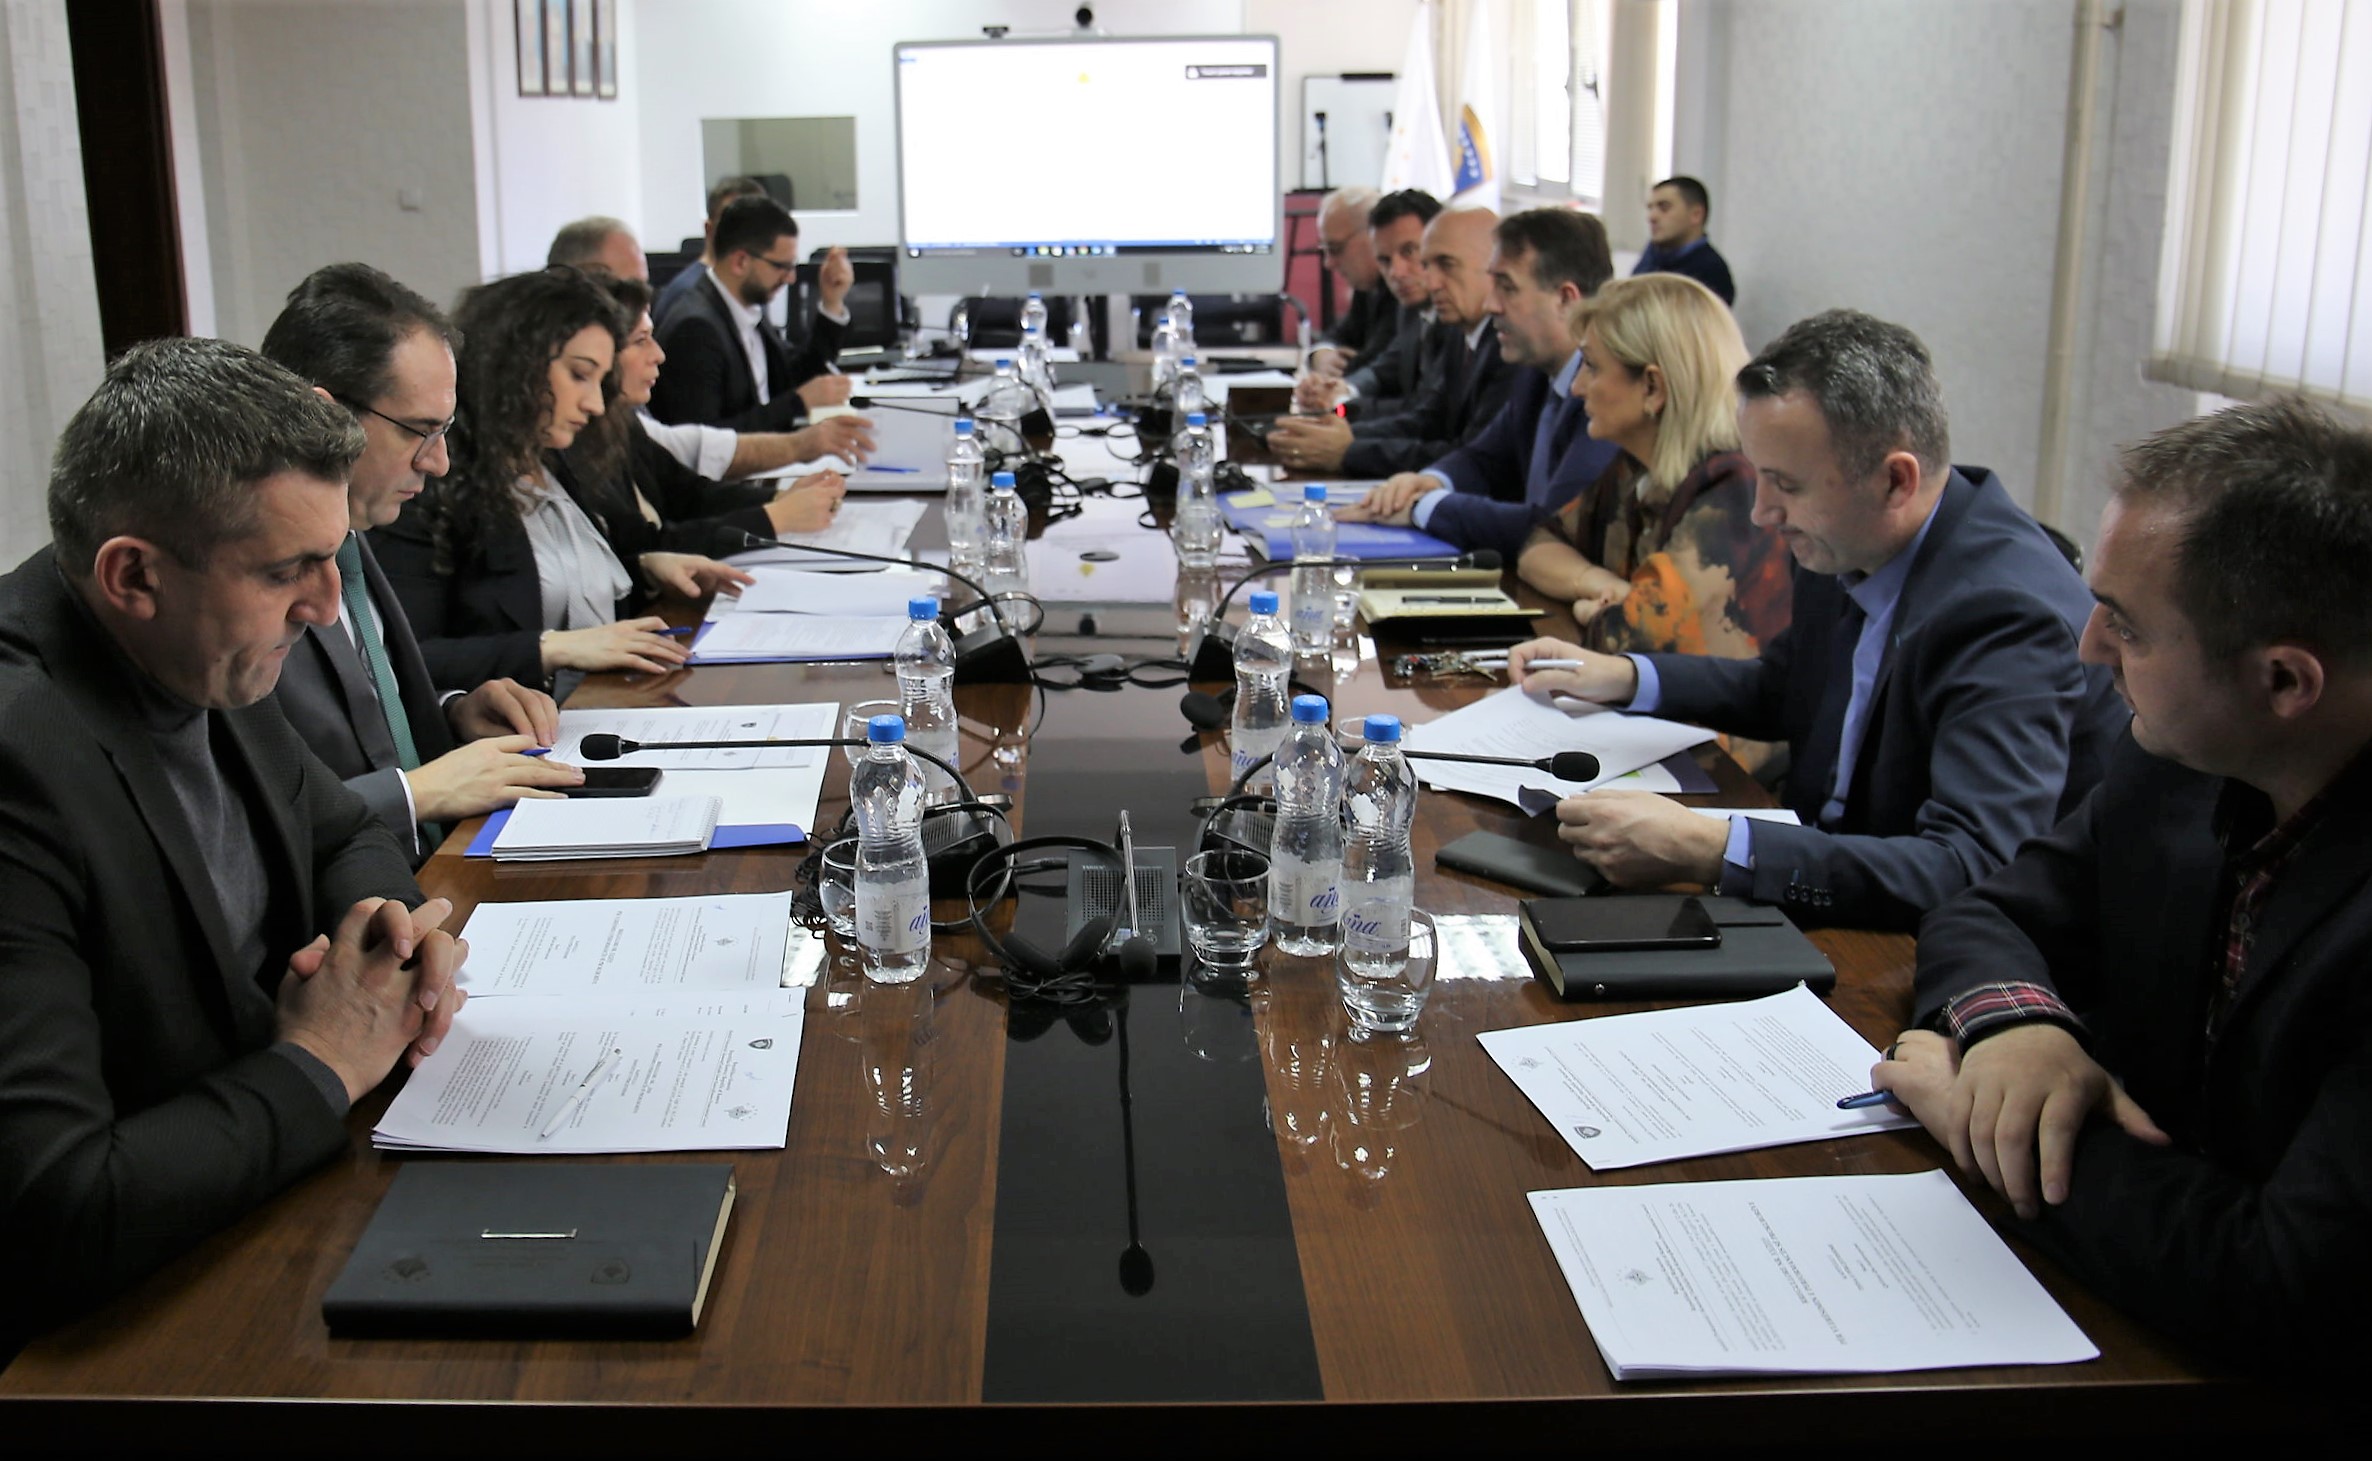 Work continues on the preparation of the draft Regulation on the Performance Evaluation of Prosecutors